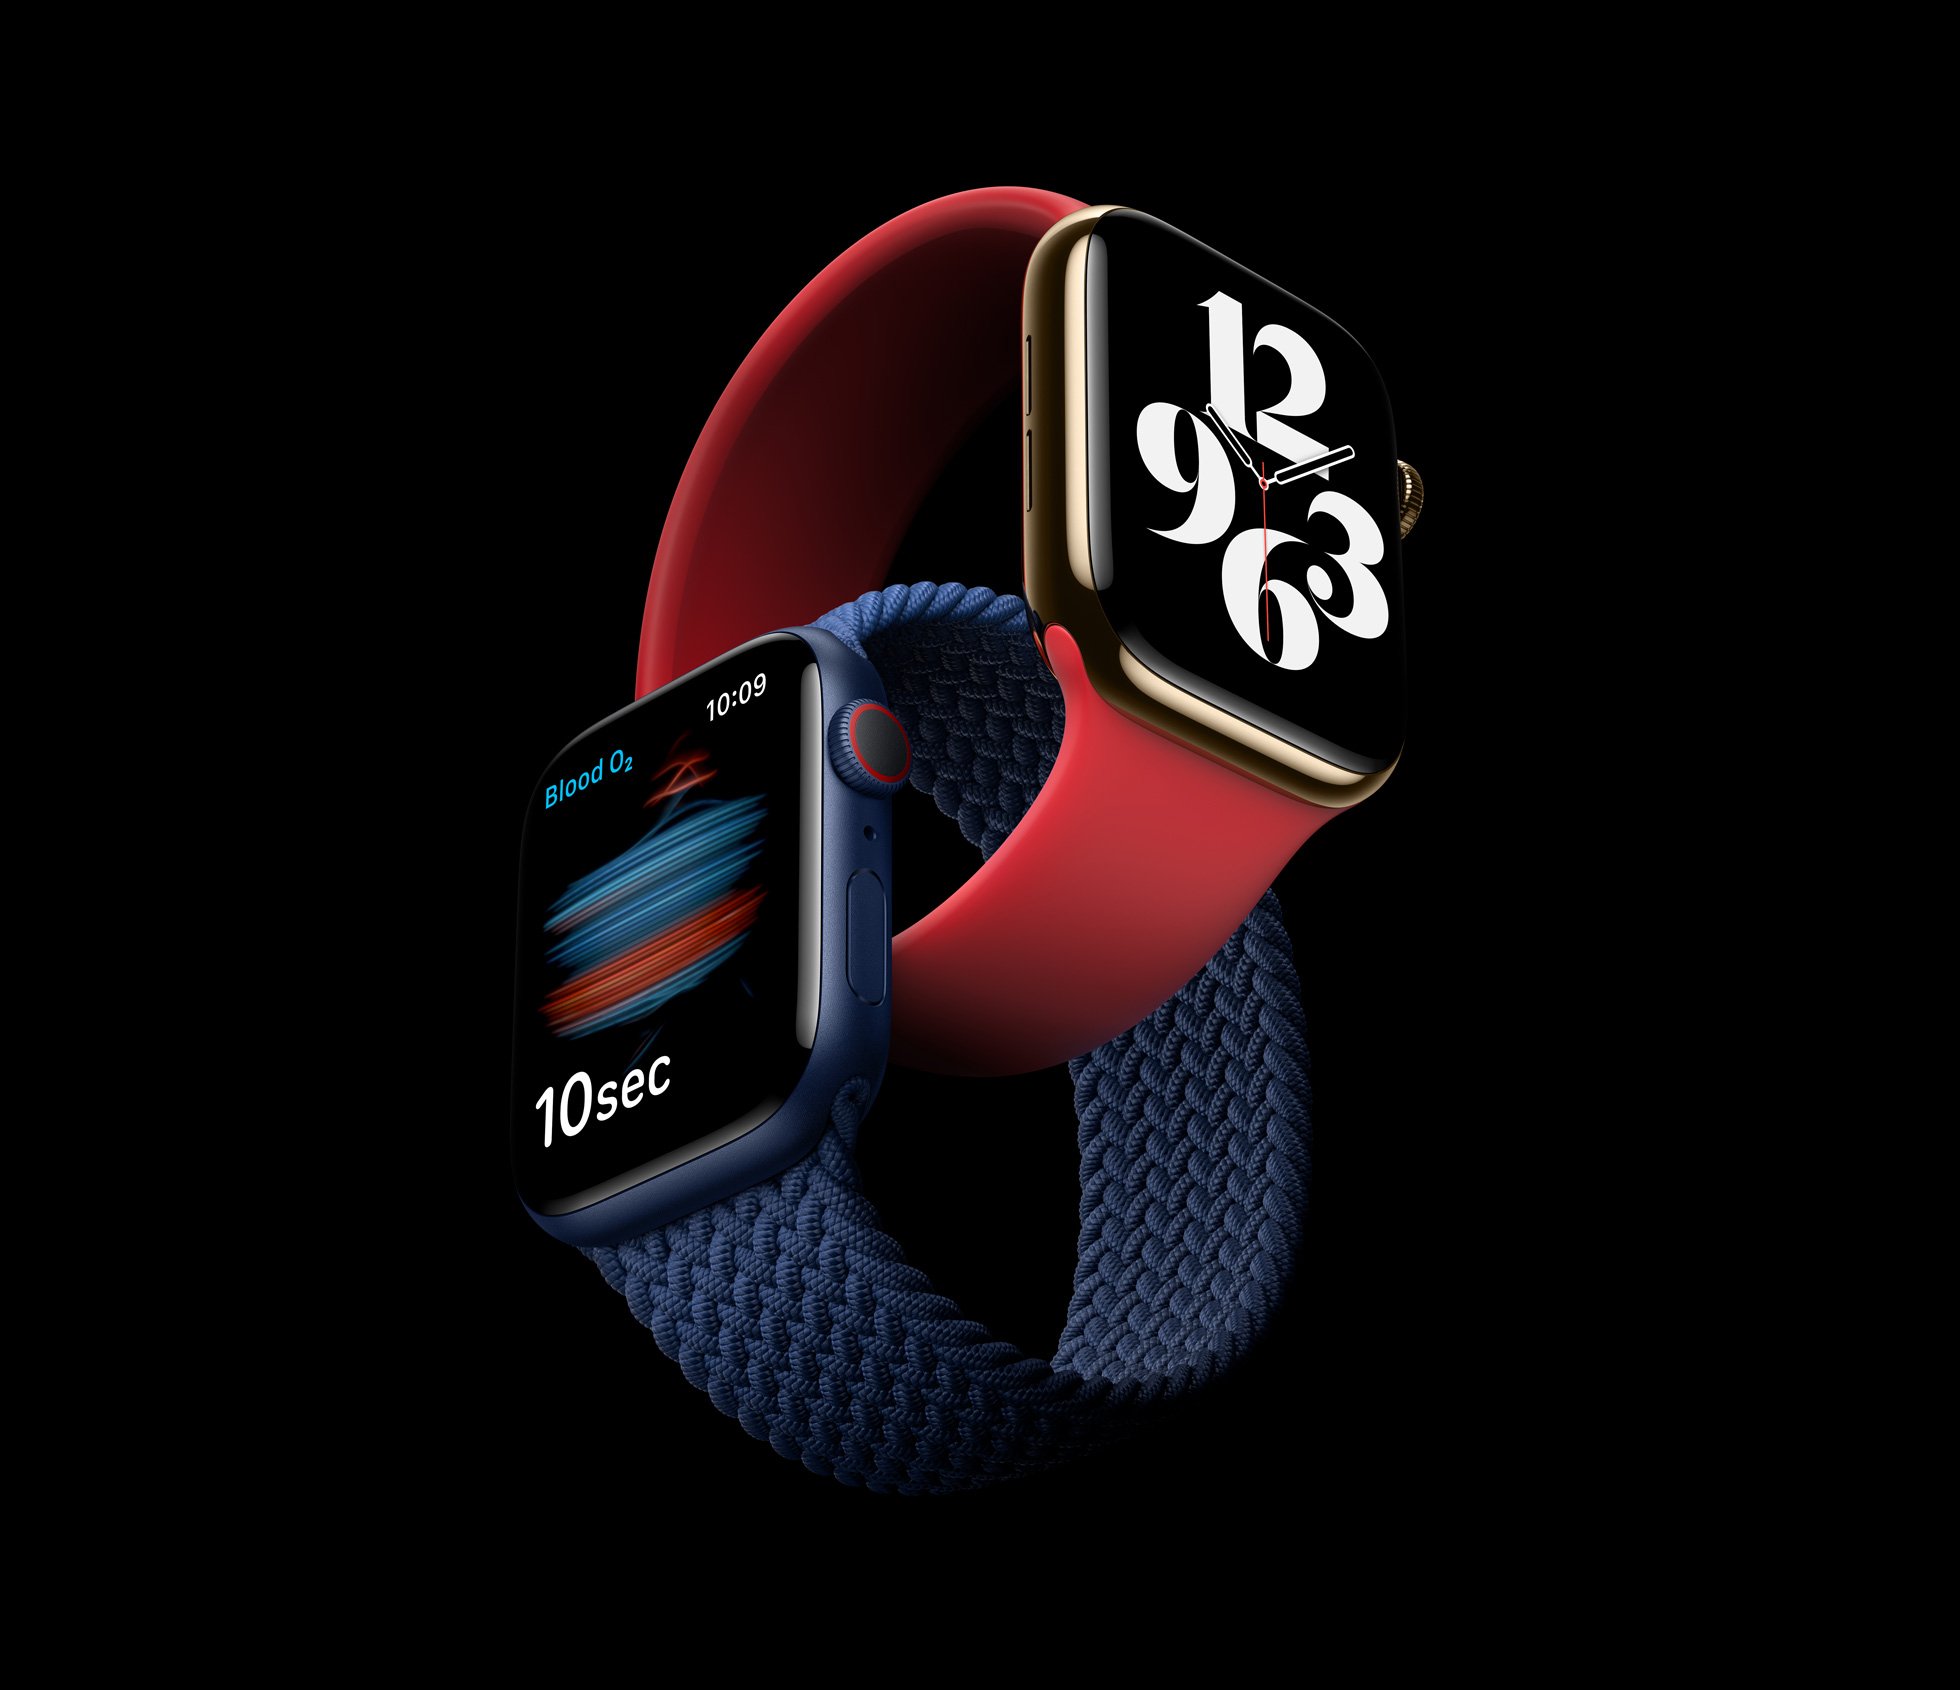 Apple announces brand new Apple Watch Series 6, available September 18, $399 | iMore